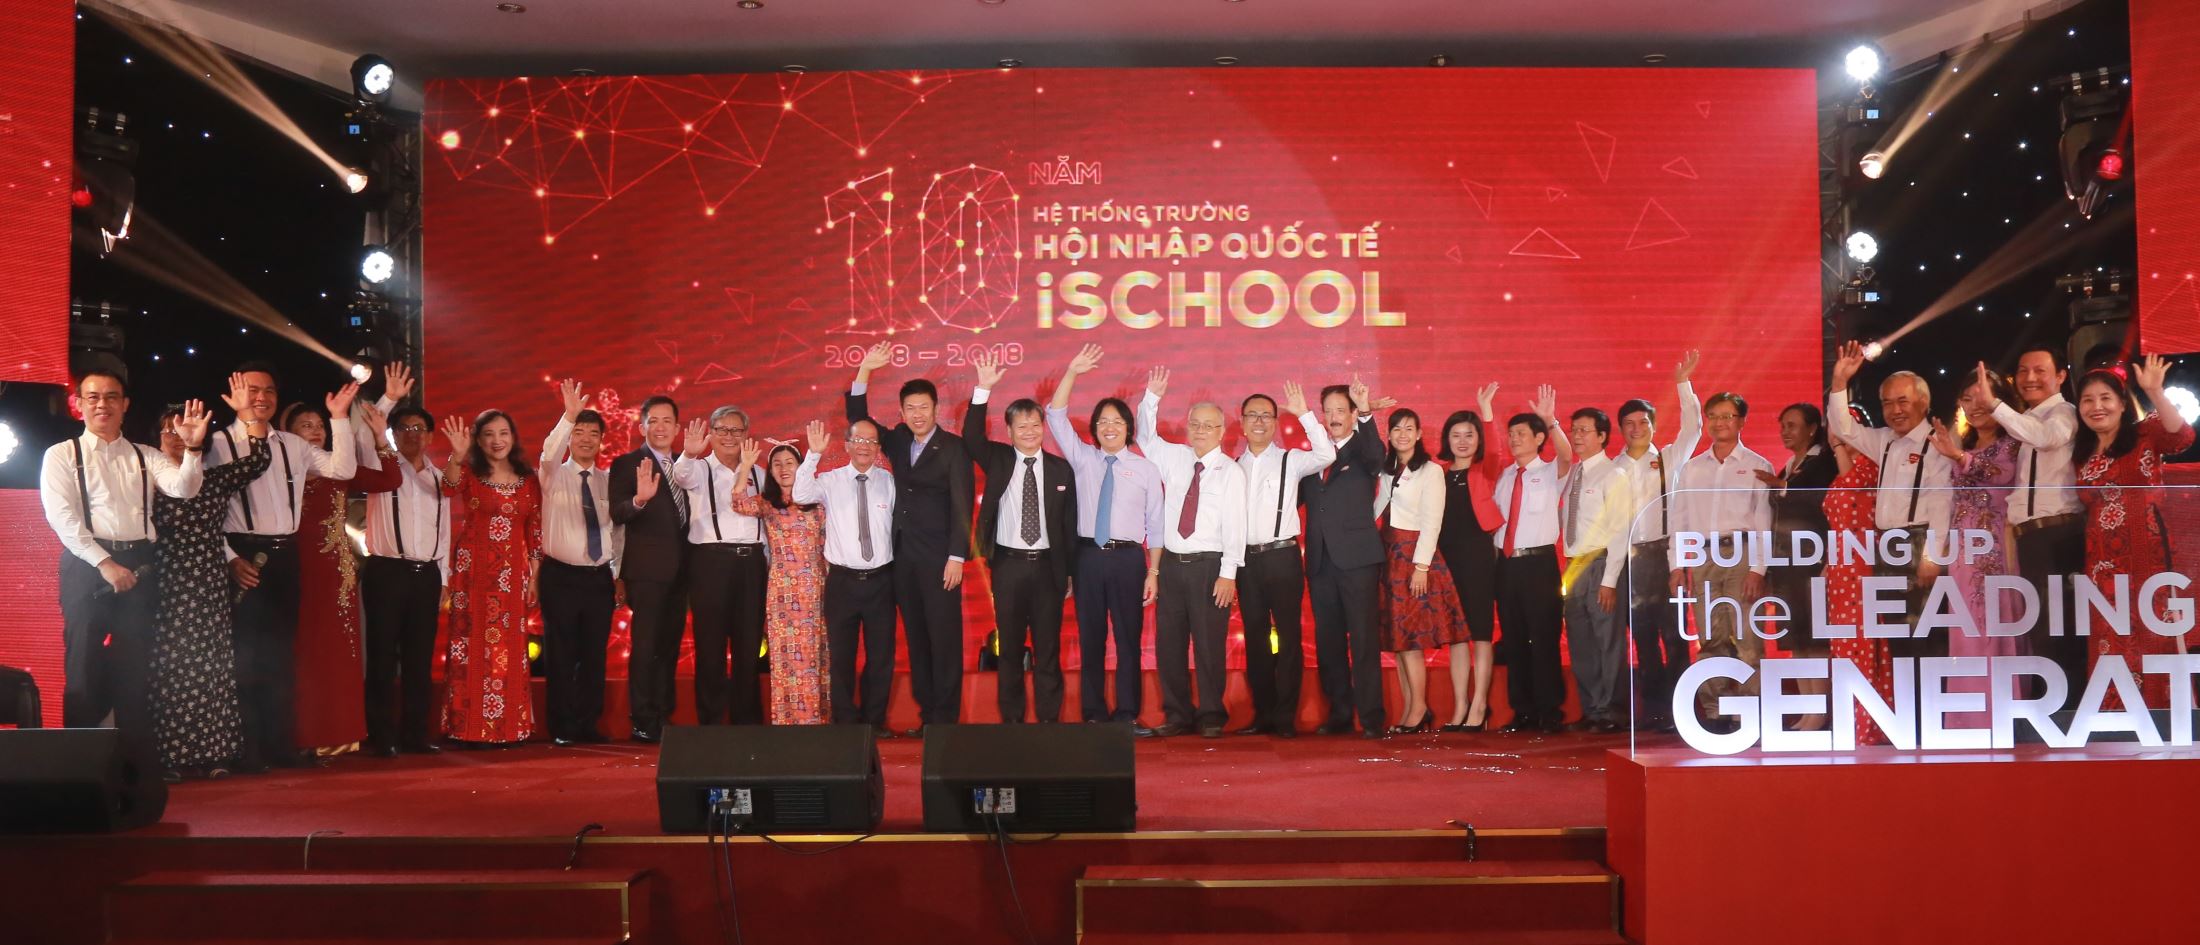 Board of Directors of iSchool company and other campuses took photo together in the event.